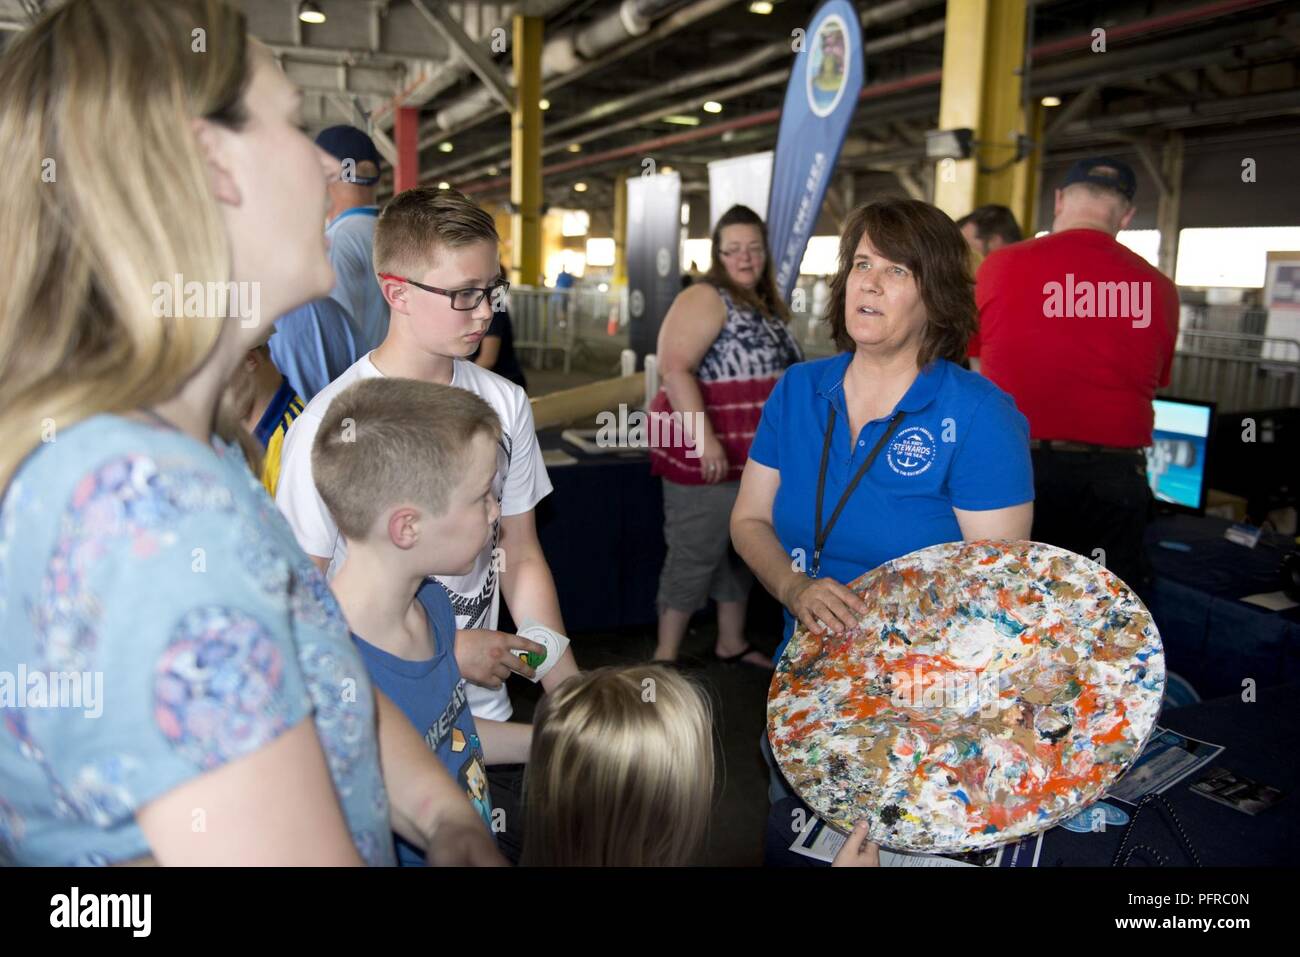 NEW YORK (May 26, 2018) Laura Busch, a natural resources program manager at U.S. Fleet Forces Command’s Fleet Environmental and Readiness Division, explains the shipboard waste process to reduce plastic waste aboard ships at the U.S. Navy’s “Stewards of the Sea: Defending Freedom, Protecting the Environment” exhibit during Fleet Week New York. The Navy employs every means available to mitigate the potential environmental effects of our activities without jeopardizing the safety of our Sailors or impacting our Navy readiness mission. Stock Photo